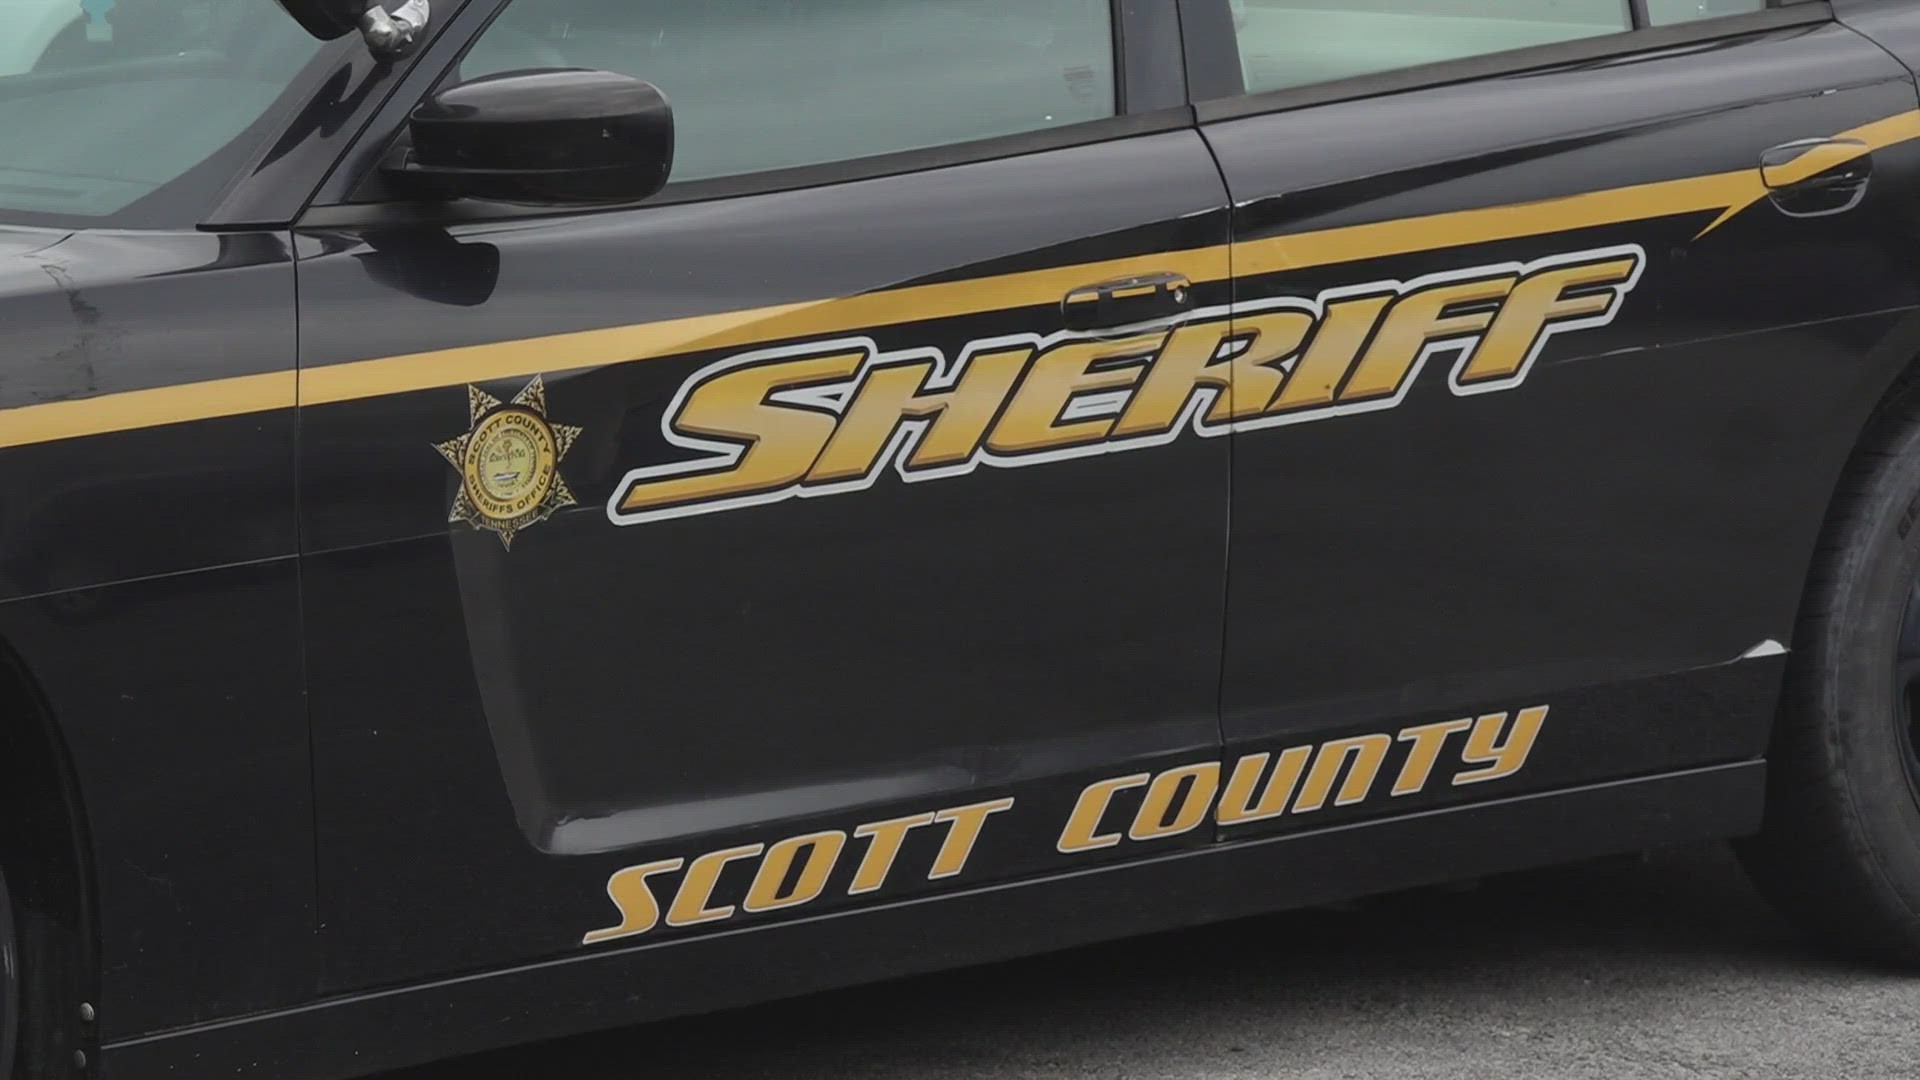 The TBI said on Jan. 31, 2022, deputies with the Scott County Sheriff's Office responded to a shooting and found a deputy dead inside a home.